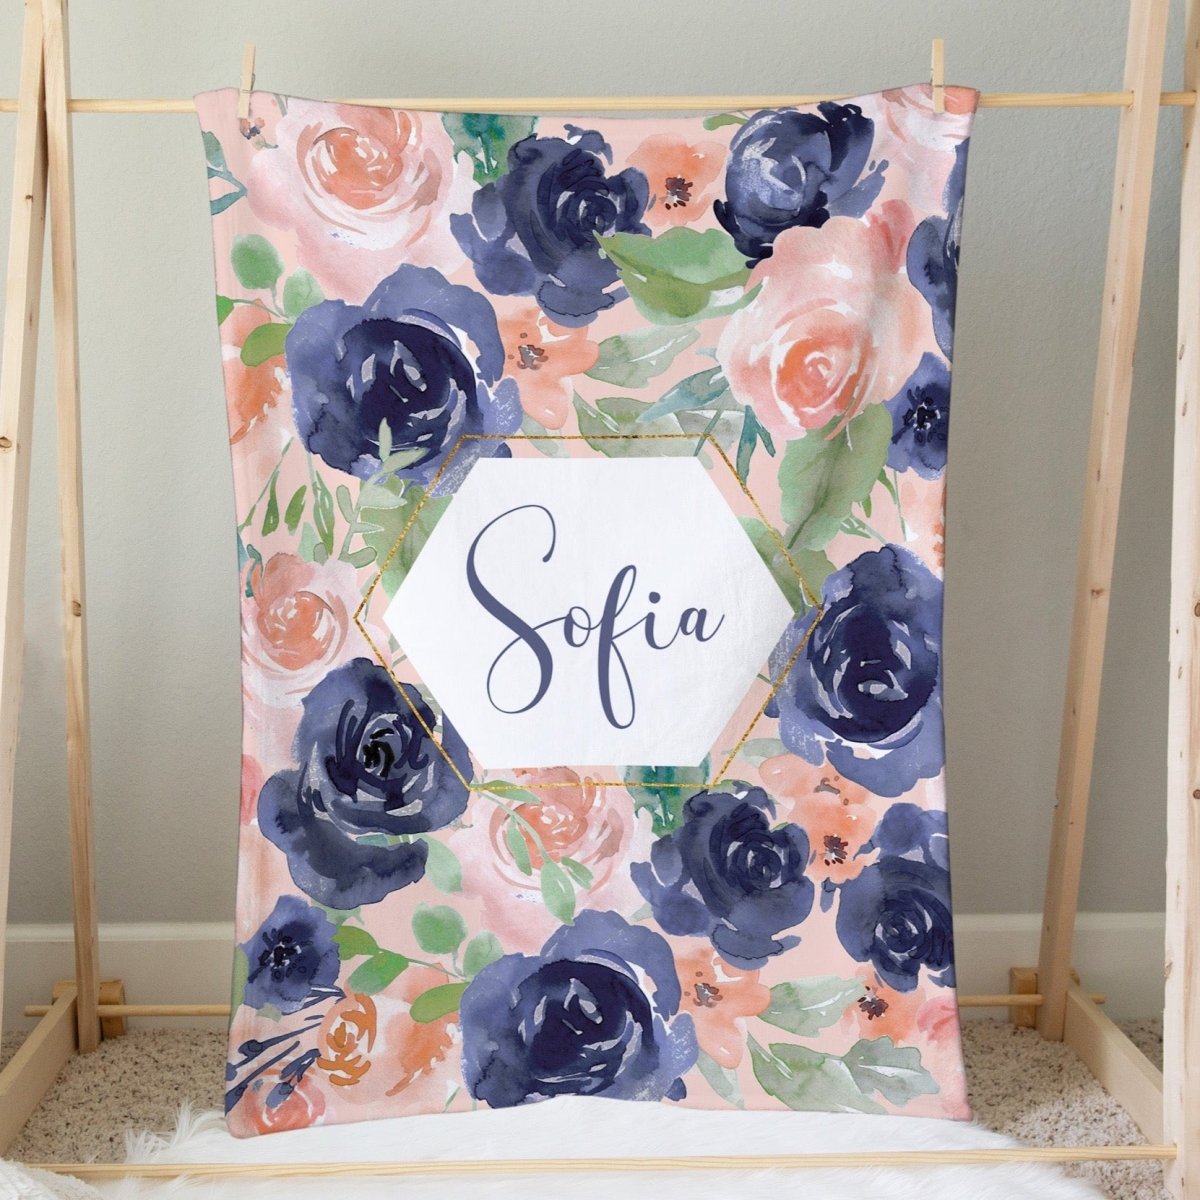 Peach & Navy Floral Personalized Minky Blanket - gender_girl, Peach & Navy Floral, Personalized_Yes